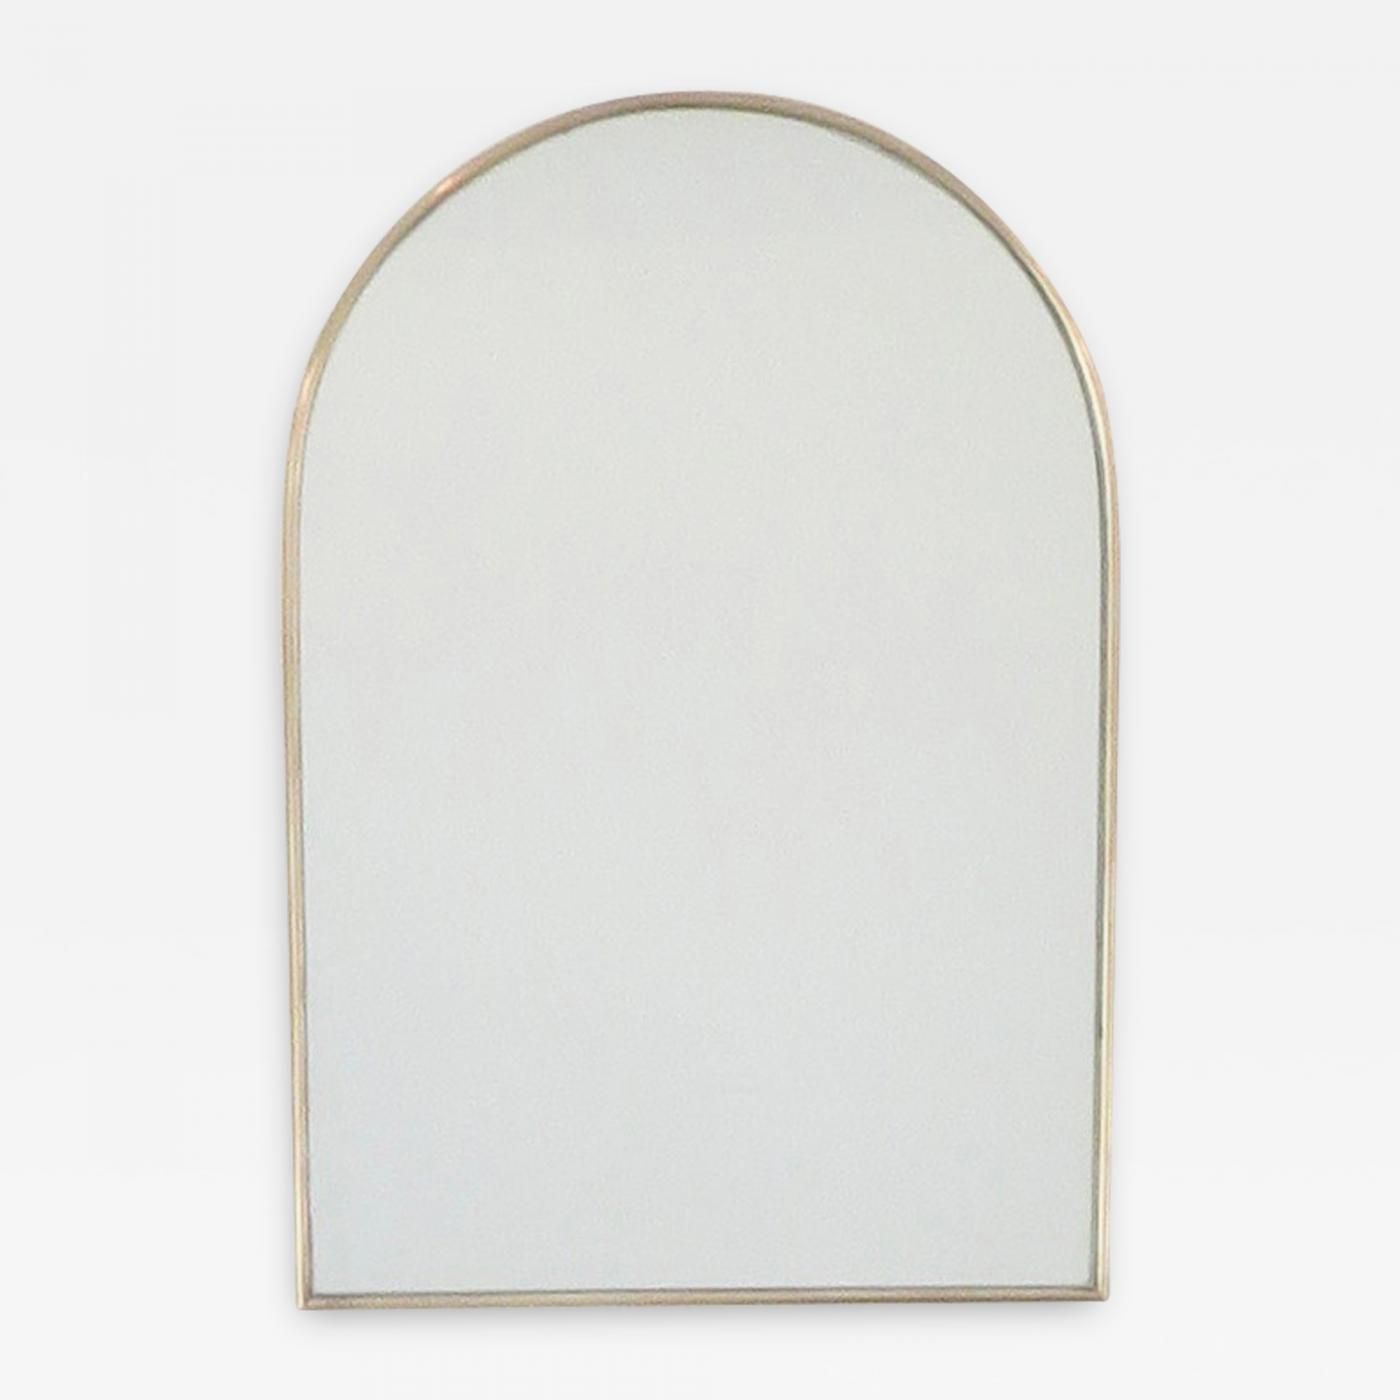 Italian Brass Framed Wall Mirror Arch Top With Regard To Bronze Arch Top Wall Mirrors (View 12 of 15)